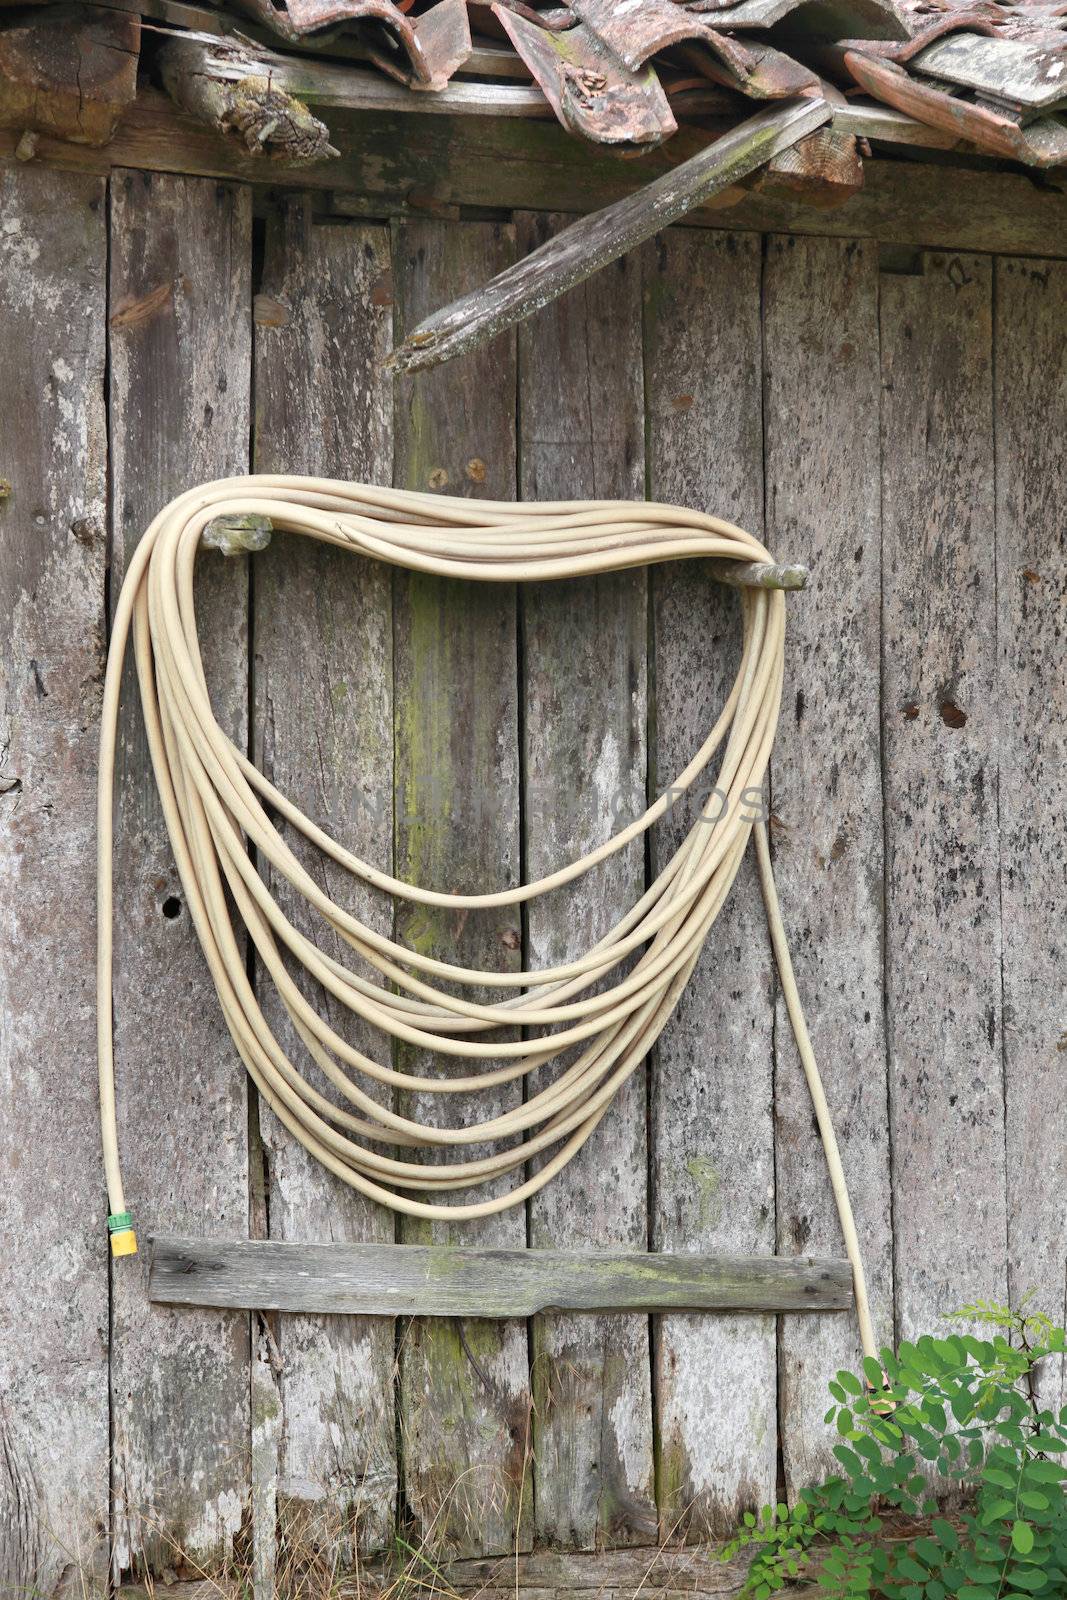 Hose attached to wooden hut by phovoir